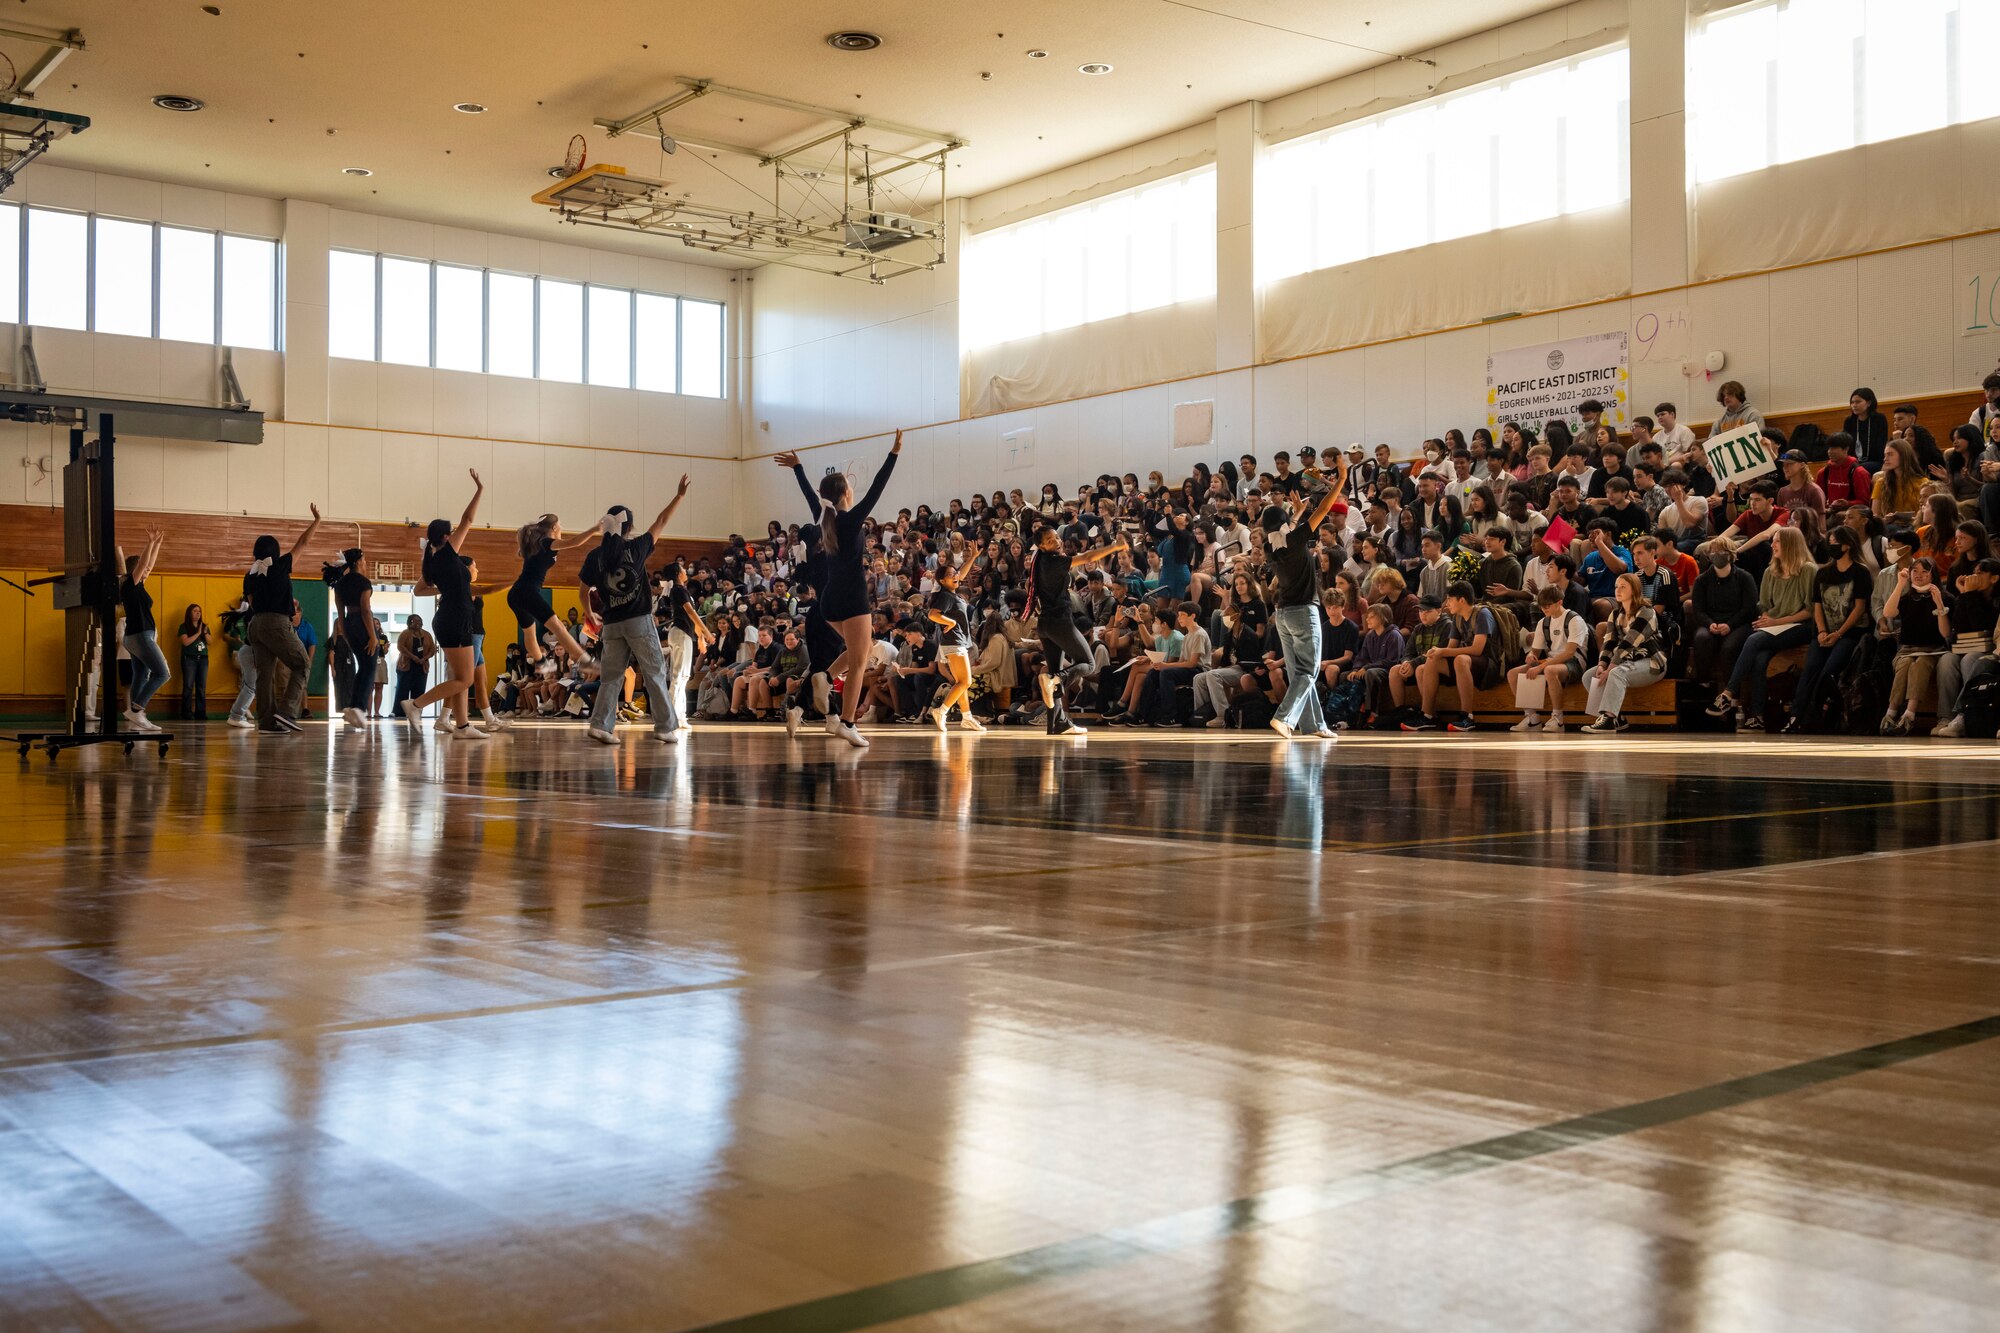 Students dance in a gym with people watching from bleachers